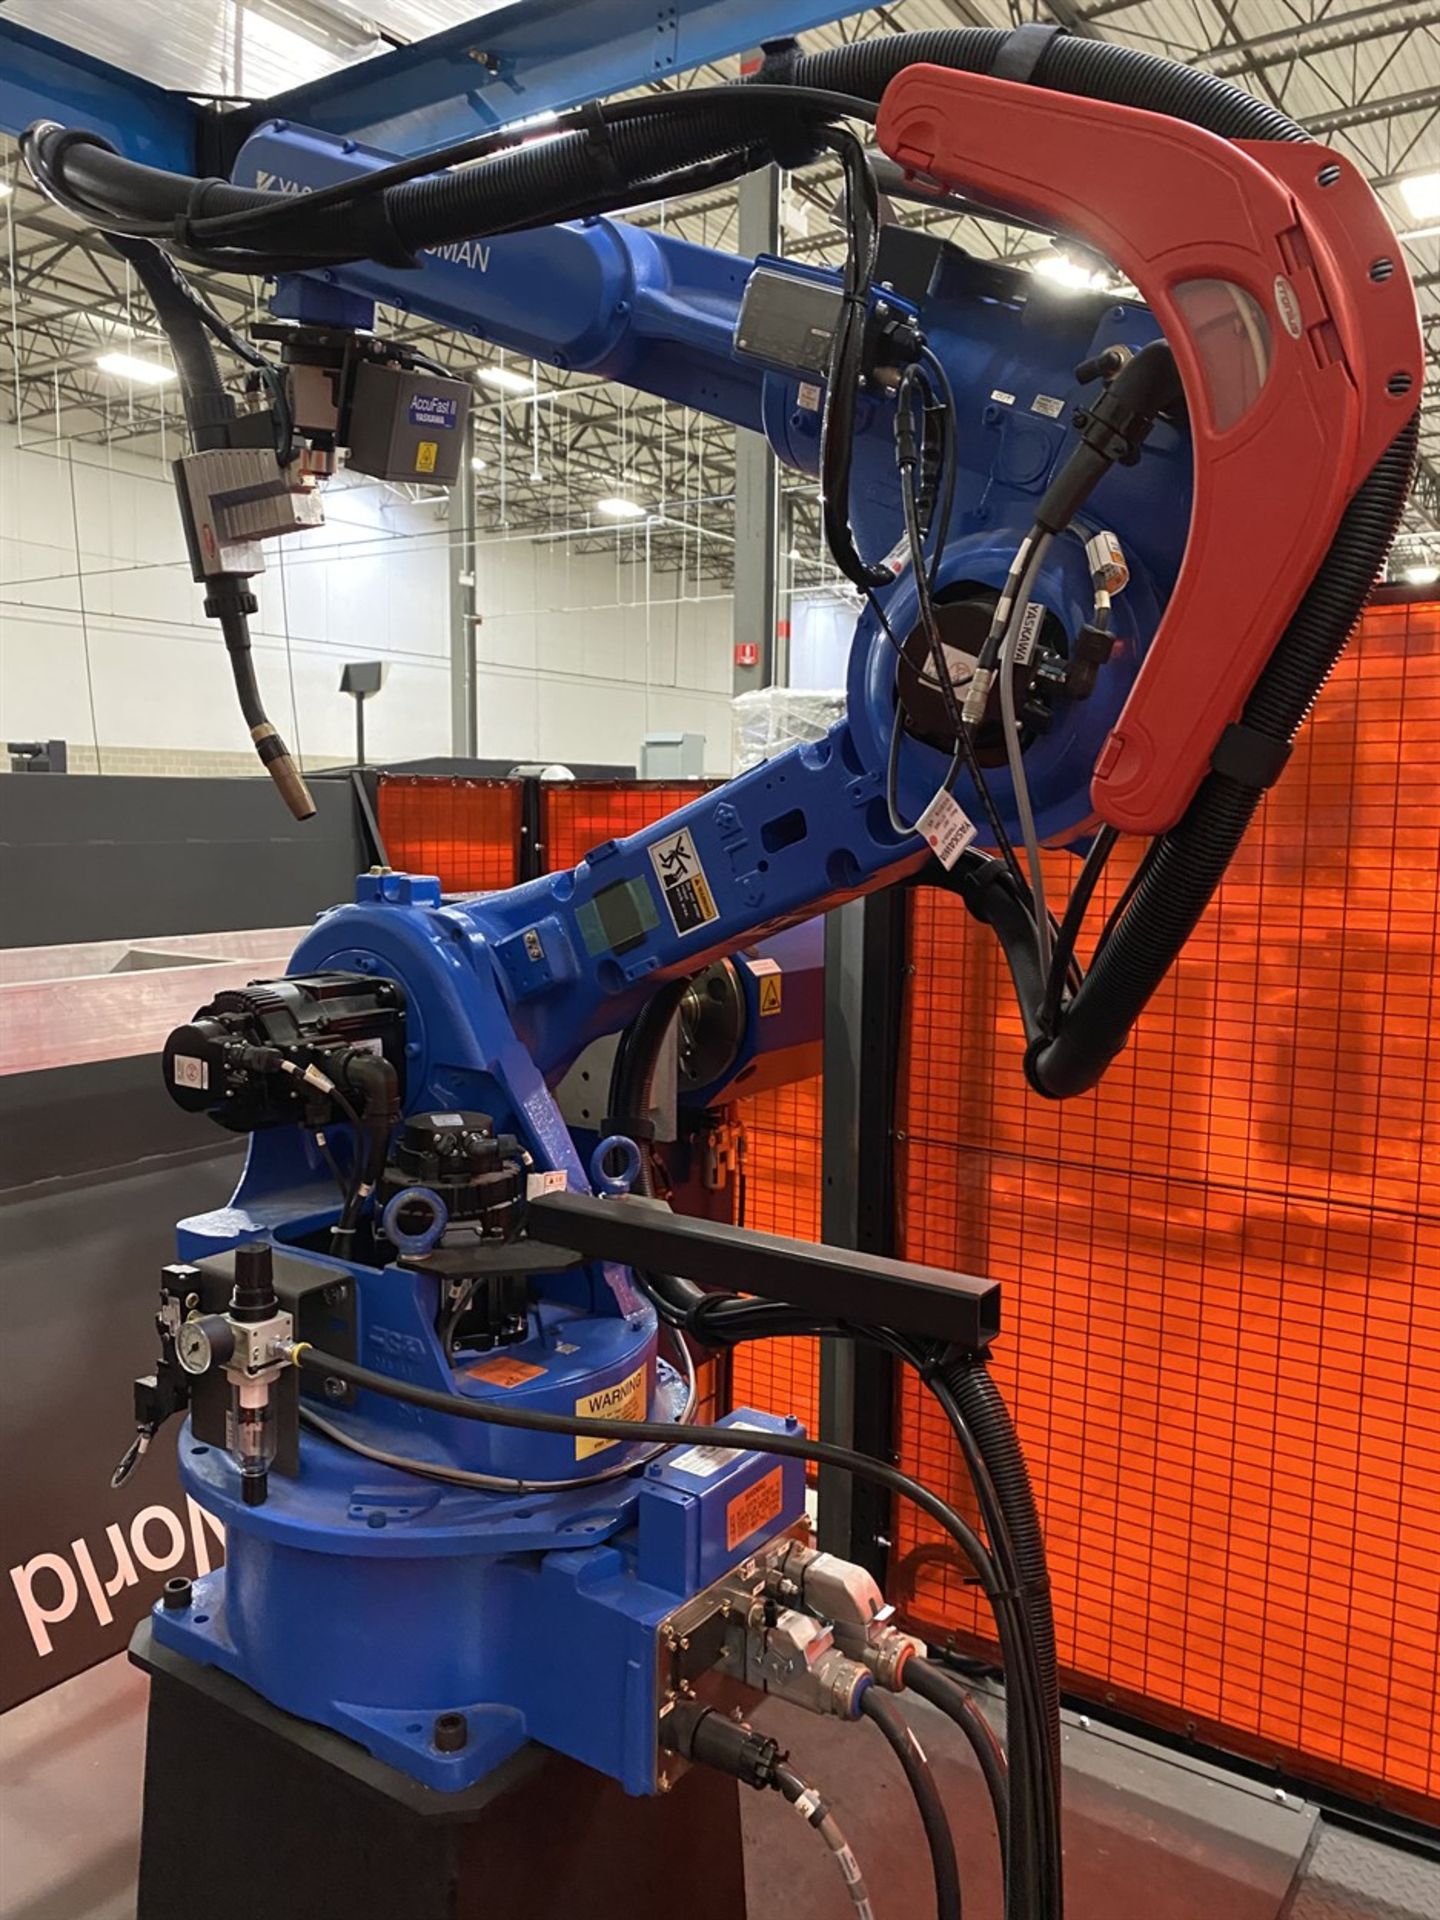 2019 YASKAWA MOTOMAN HP20D Robotic Welding Cell, s/n RH9G00-2703-5, 20 Kg Payload, 6-Axis, 120.6” - Image 5 of 10